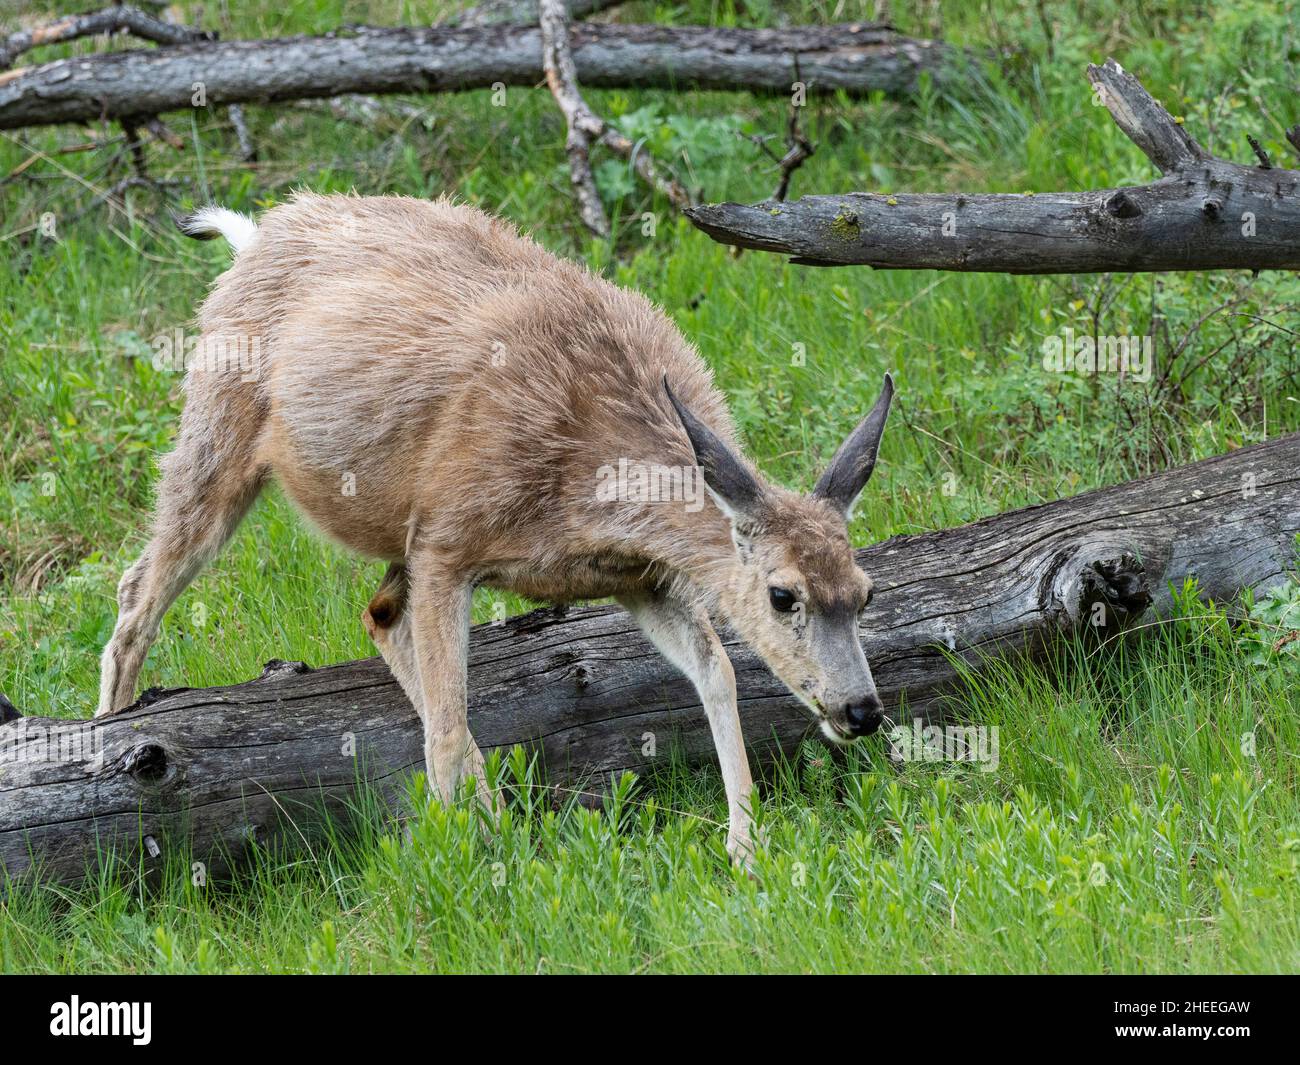 A young mule deer, Odocoileus hemionus, grazing on a hillside in Yellowstone National Park, Wyoming. Stock Photo